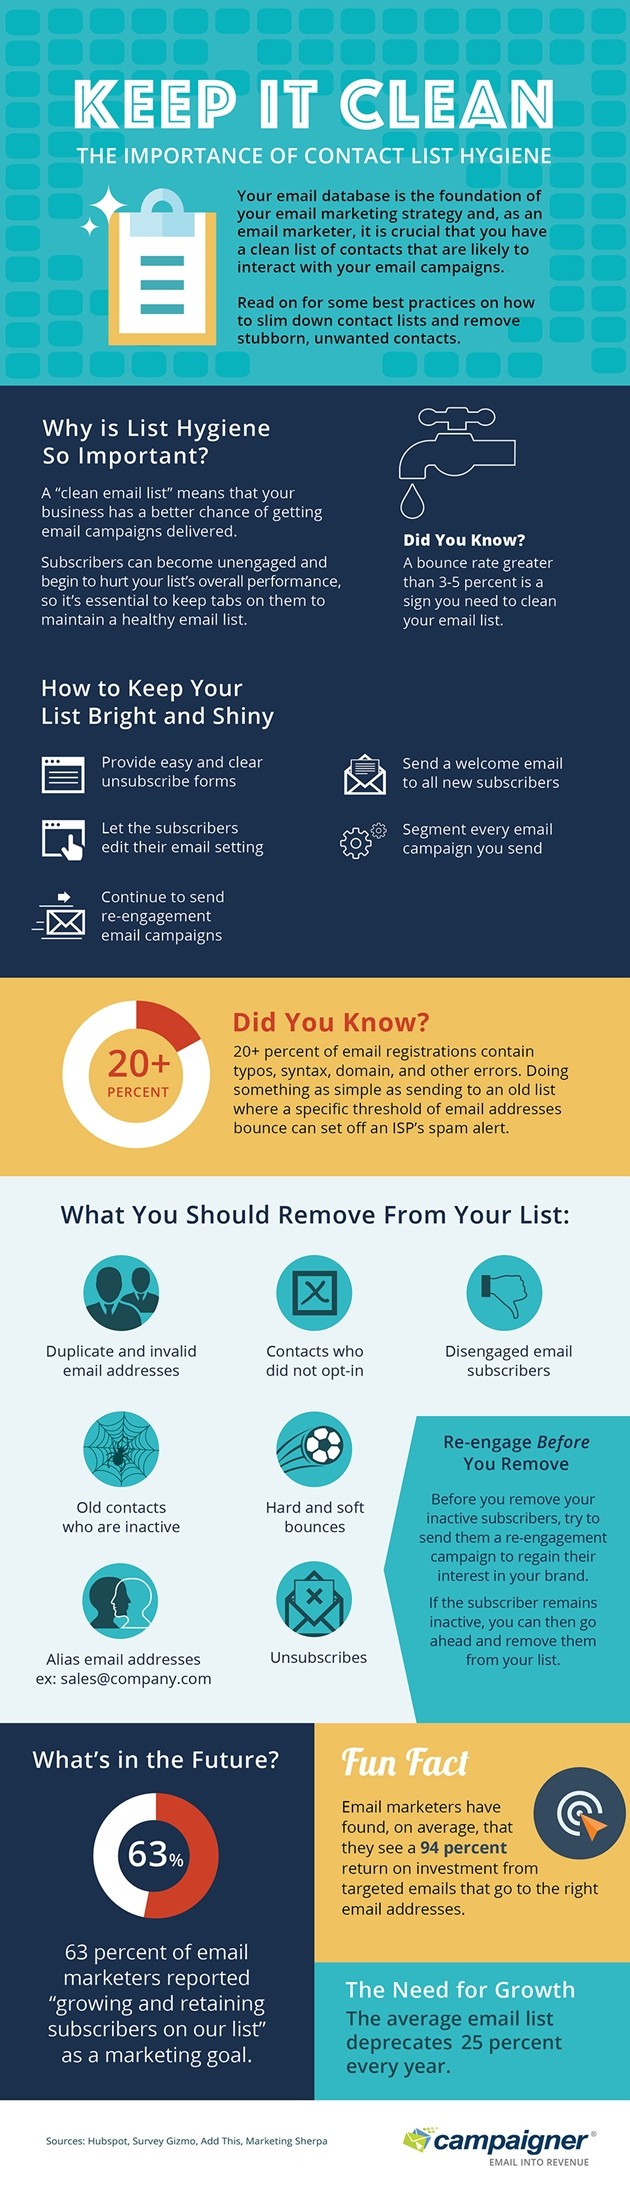 Keep It Clean: The Importance of Email-List Hygiene